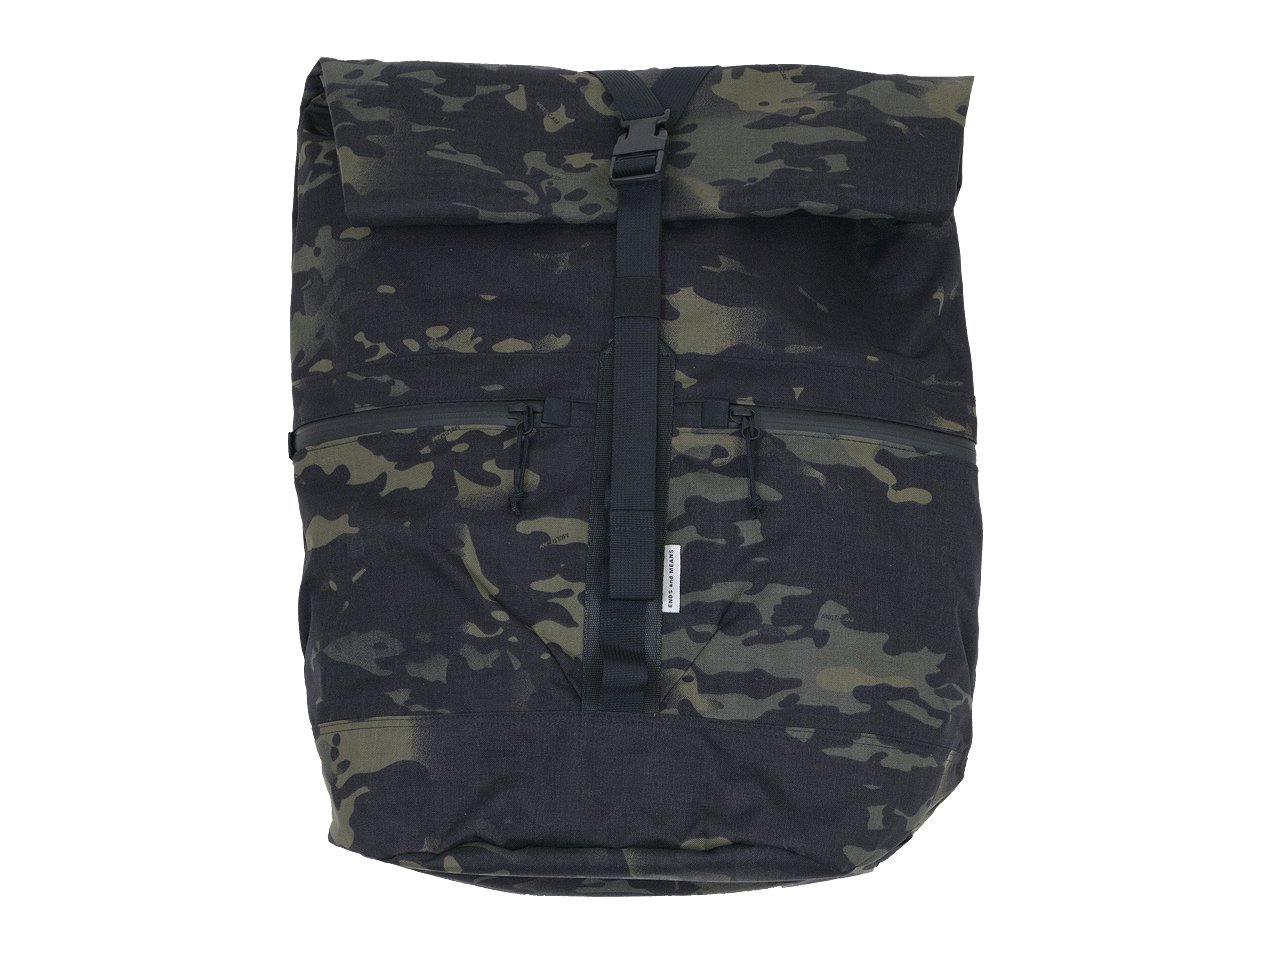 ENDS and MEANS Refugee Duffle Back Pack BLACK MULTI CAM
